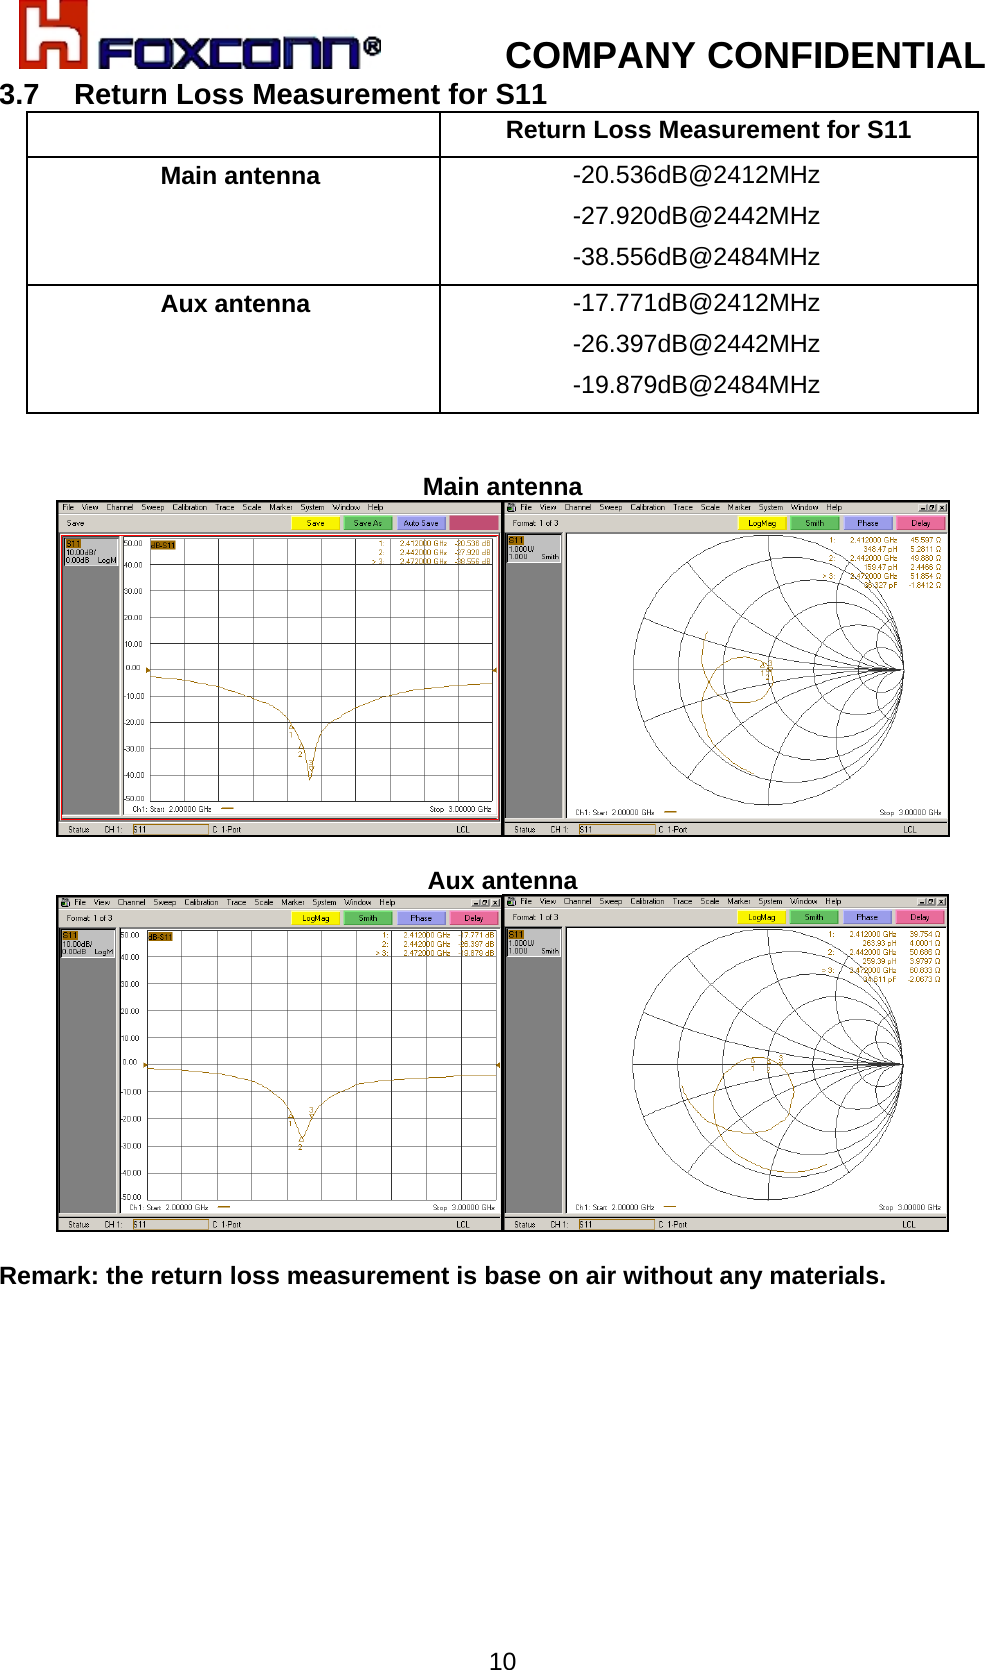            COMPANY CONFIDENTIAL   103.7  Return Loss Measurement for S11  Return Loss Measurement for S11 Main antenna  -20.536dB@2412MHz  -27.920dB@2442MHz -38.556dB@2484MHz Aux antenna  -17.771dB@2412MHz  -26.397dB@2442MHz  -19.879dB@2484MHz   Main antenna   Aux antenna   Remark: the return loss measurement is base on air without any materials.  